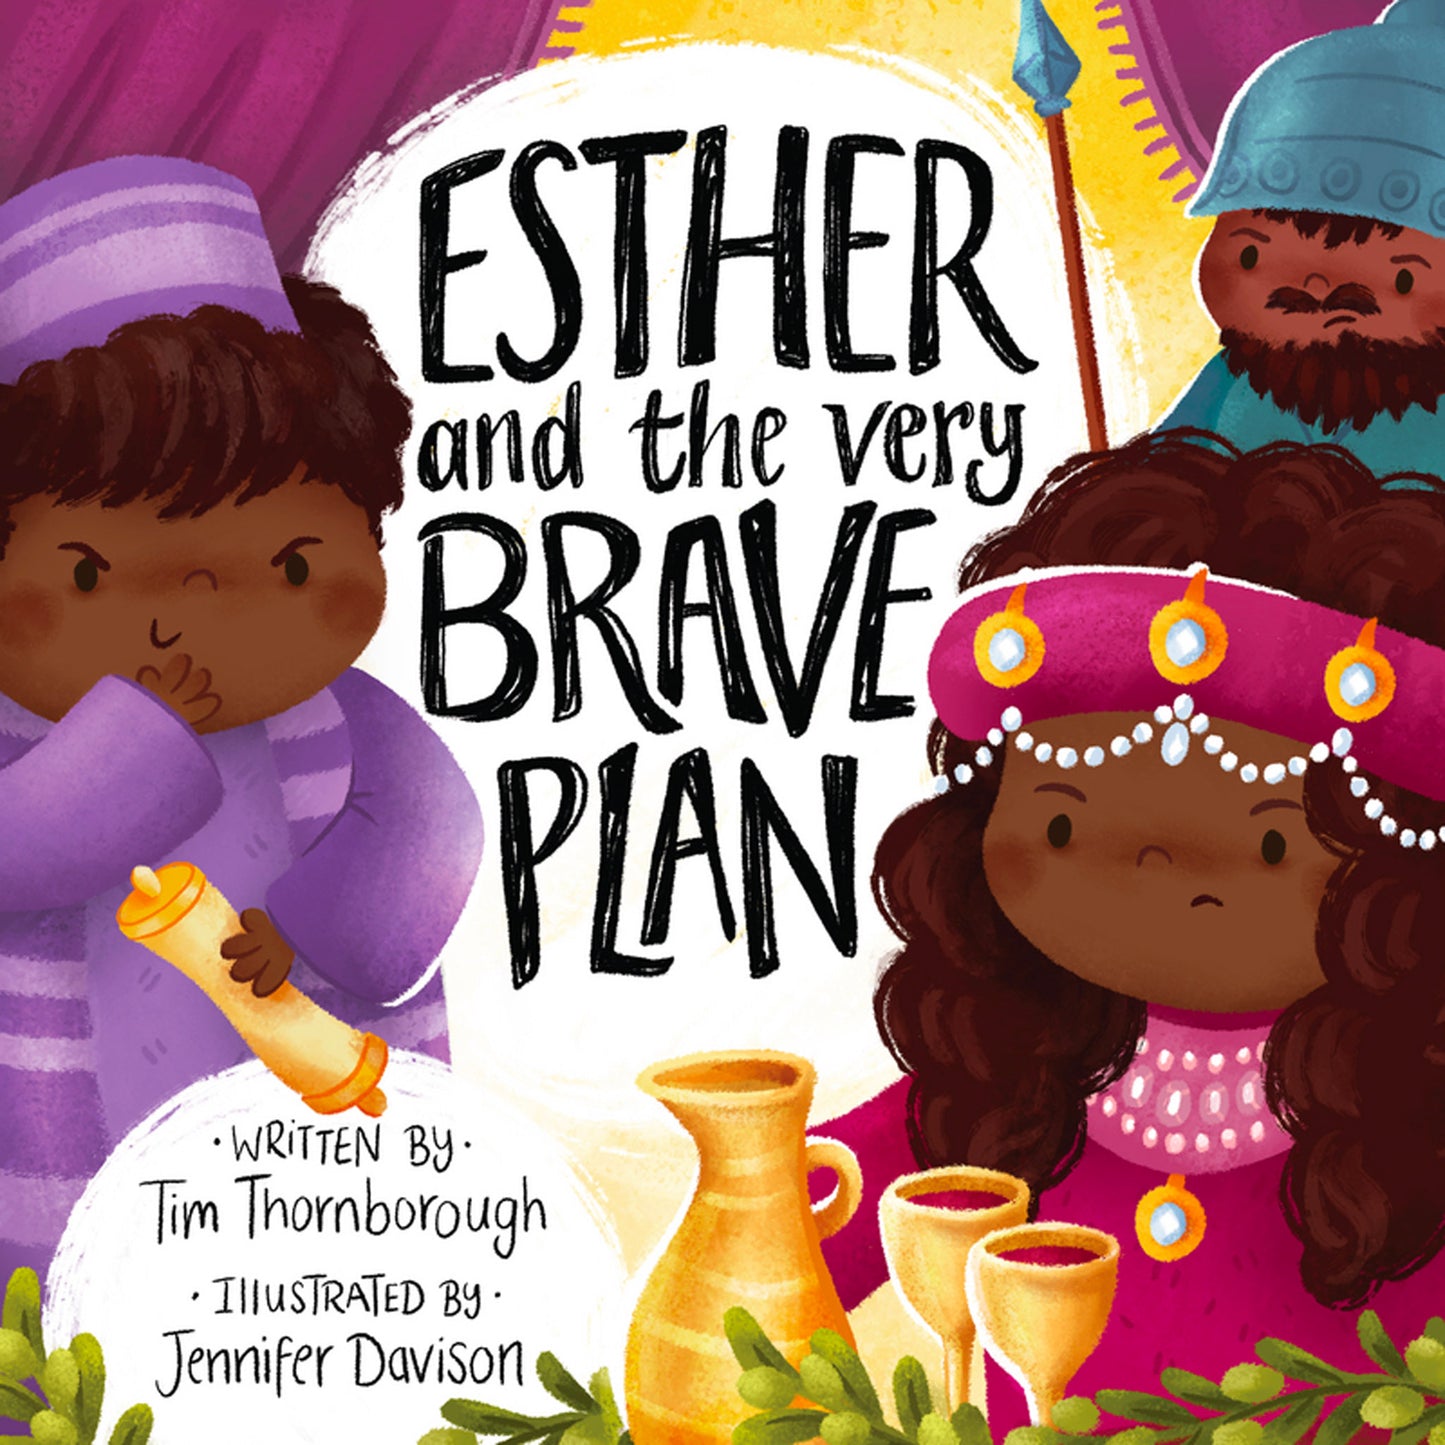 Esther and the Very Brave Plan